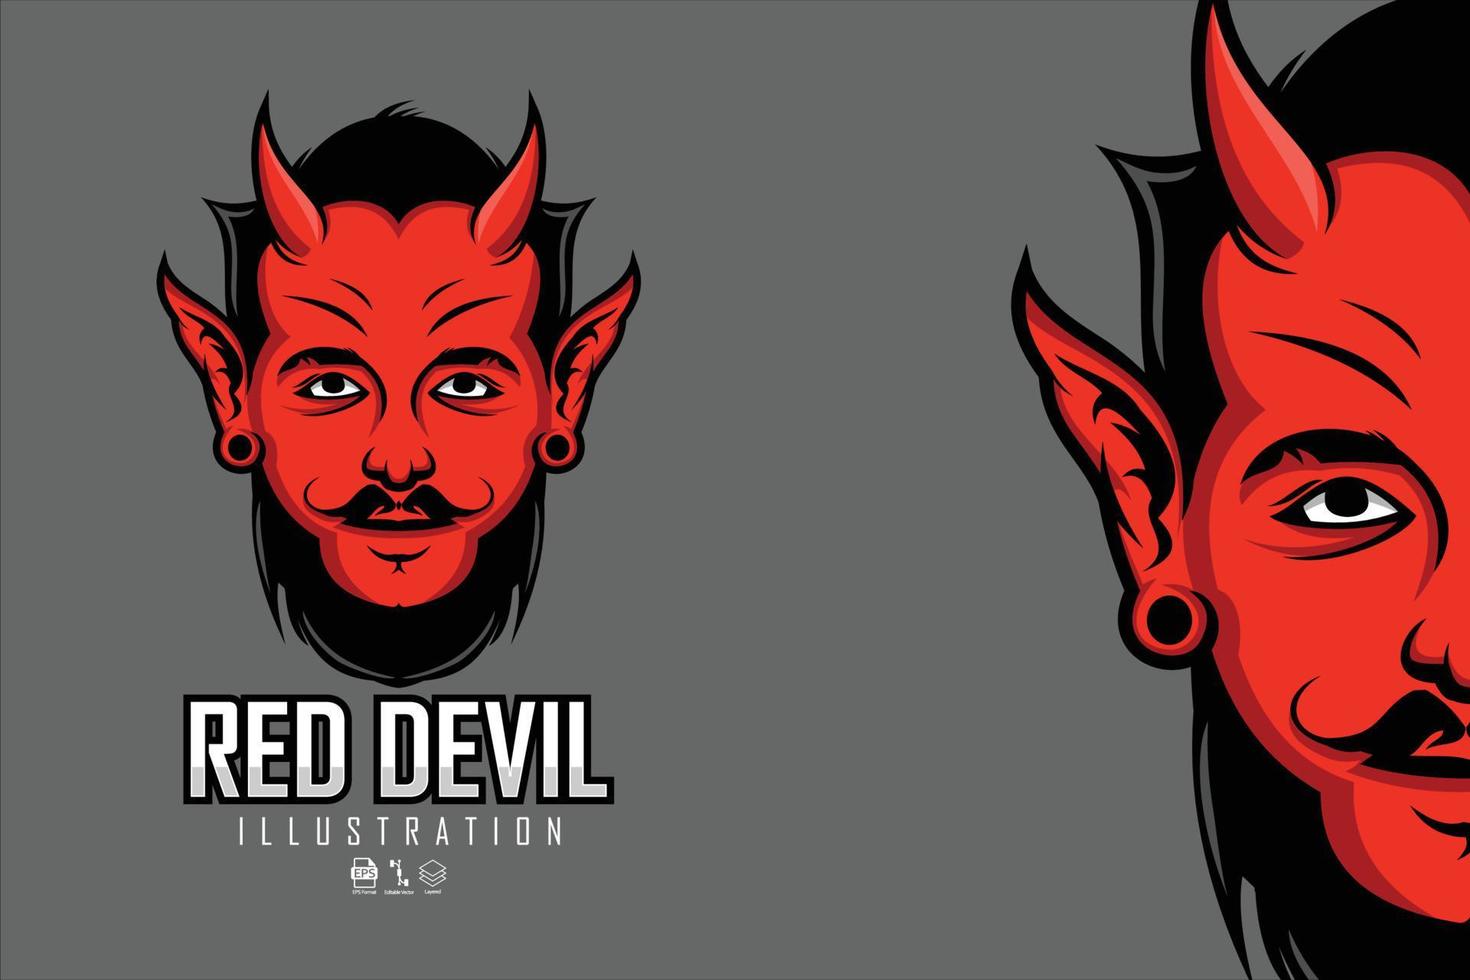 RED DEVIL HEAD ILLUSTRATION WITH A GRAY BACKGROUND.eps vector